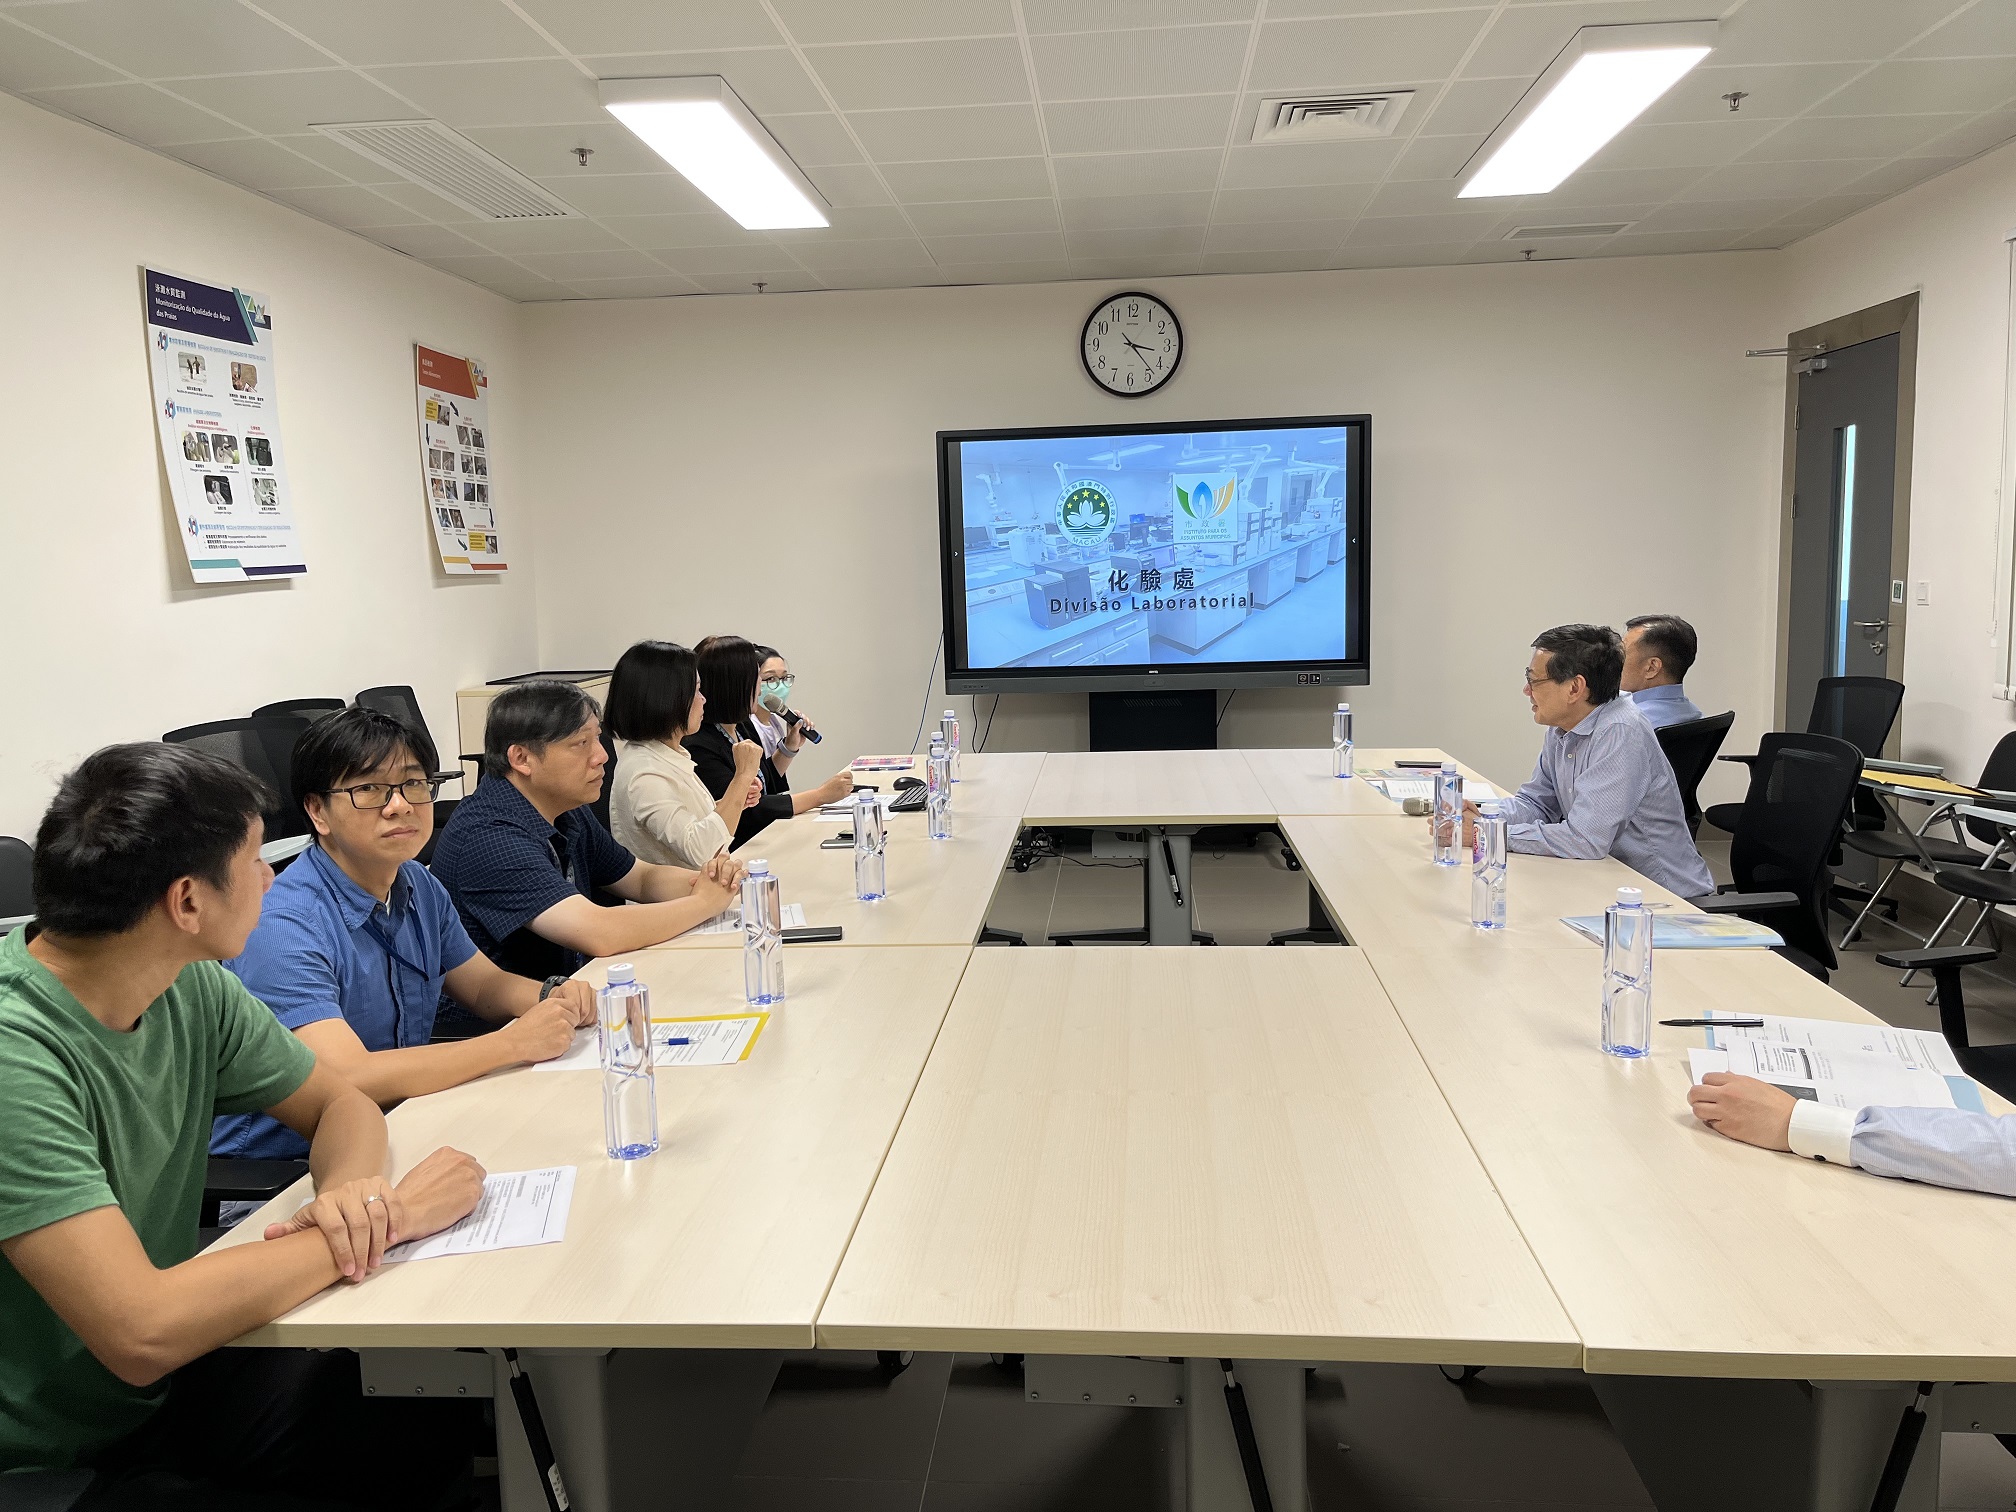 Meeting with the Head of the Laboratory Division, Ms. LAO Wai-man and other experts for intensive discussion and experience sharing of laboratory work.